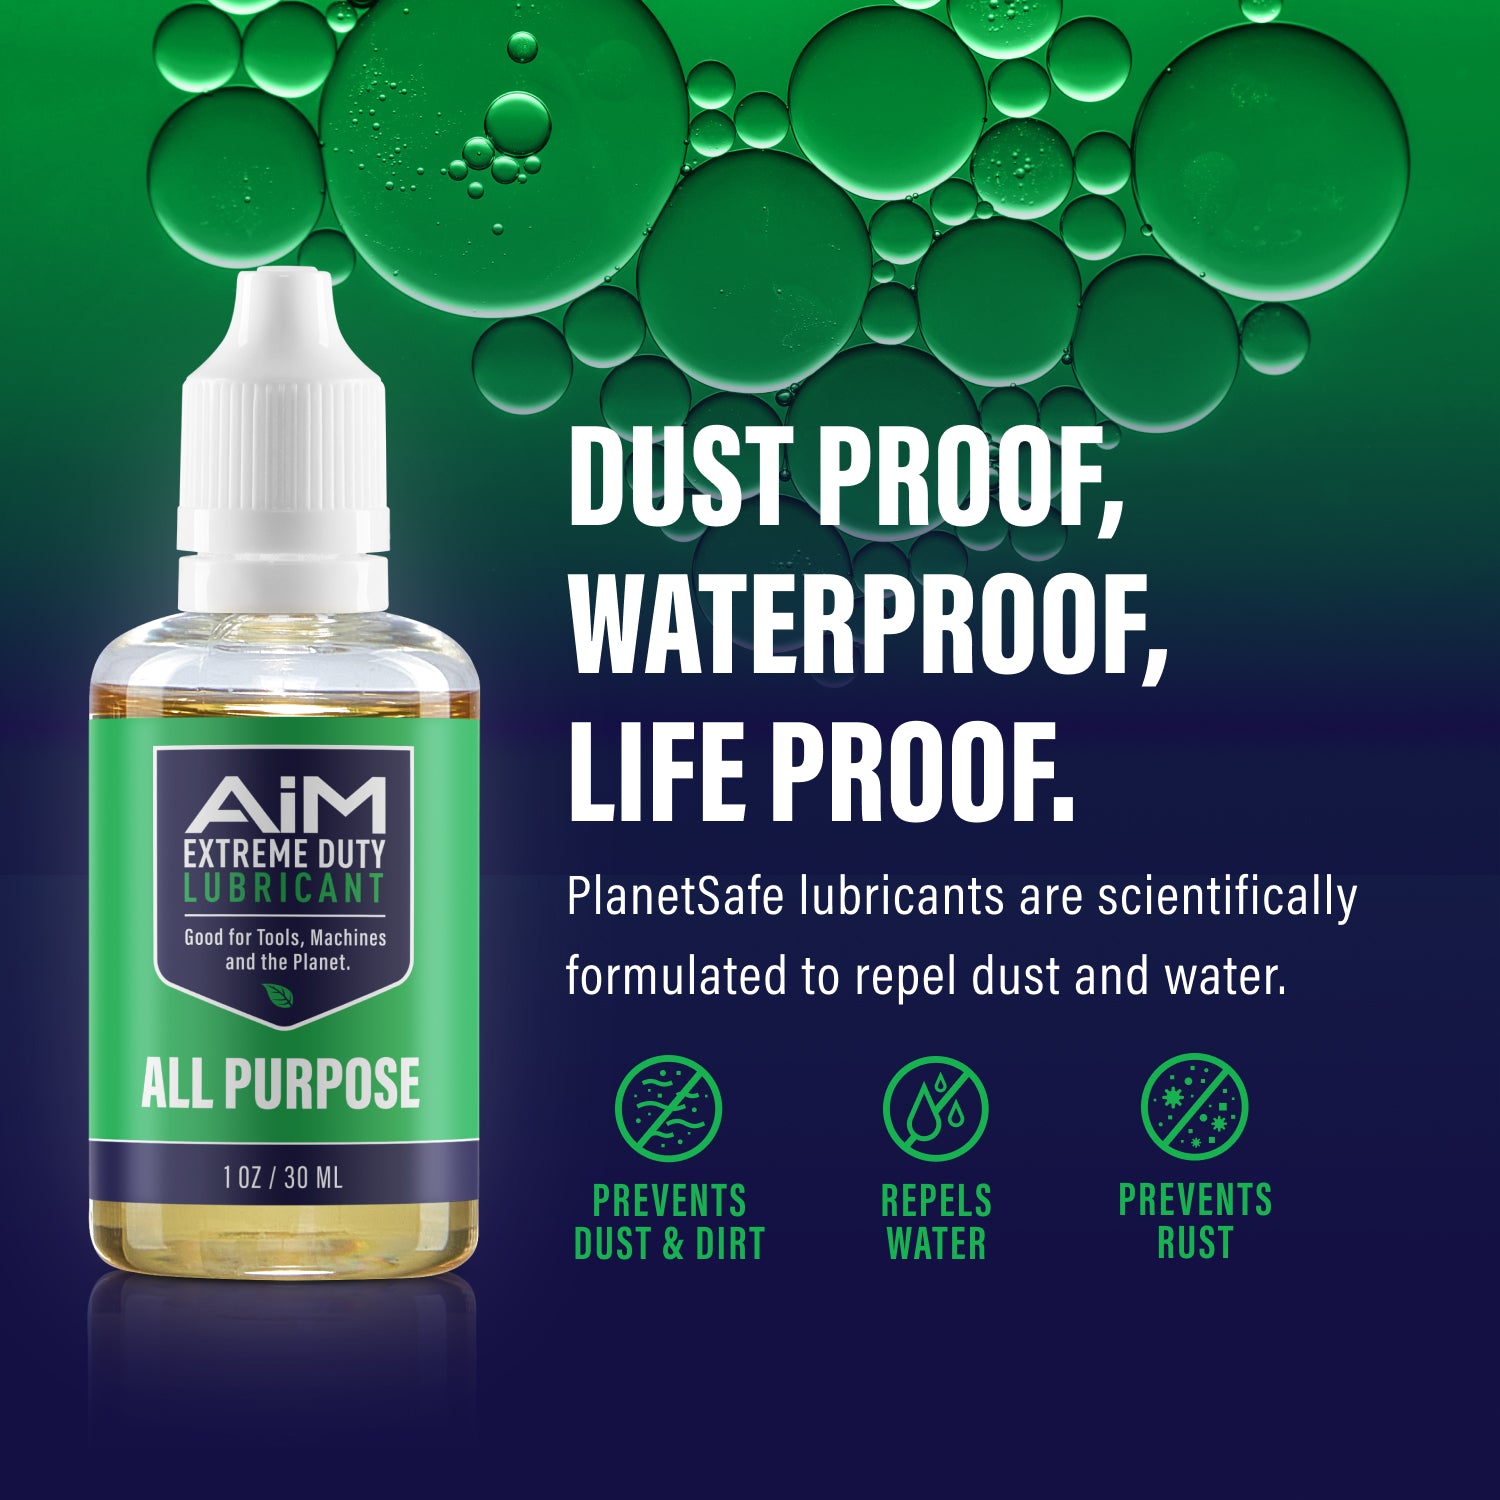 PlanetSafe AIM Extreme Duty Lubricant 1oz - Worlds best all purpose lube - household garage - non-toxic - rust removal - tools chains hinges metal